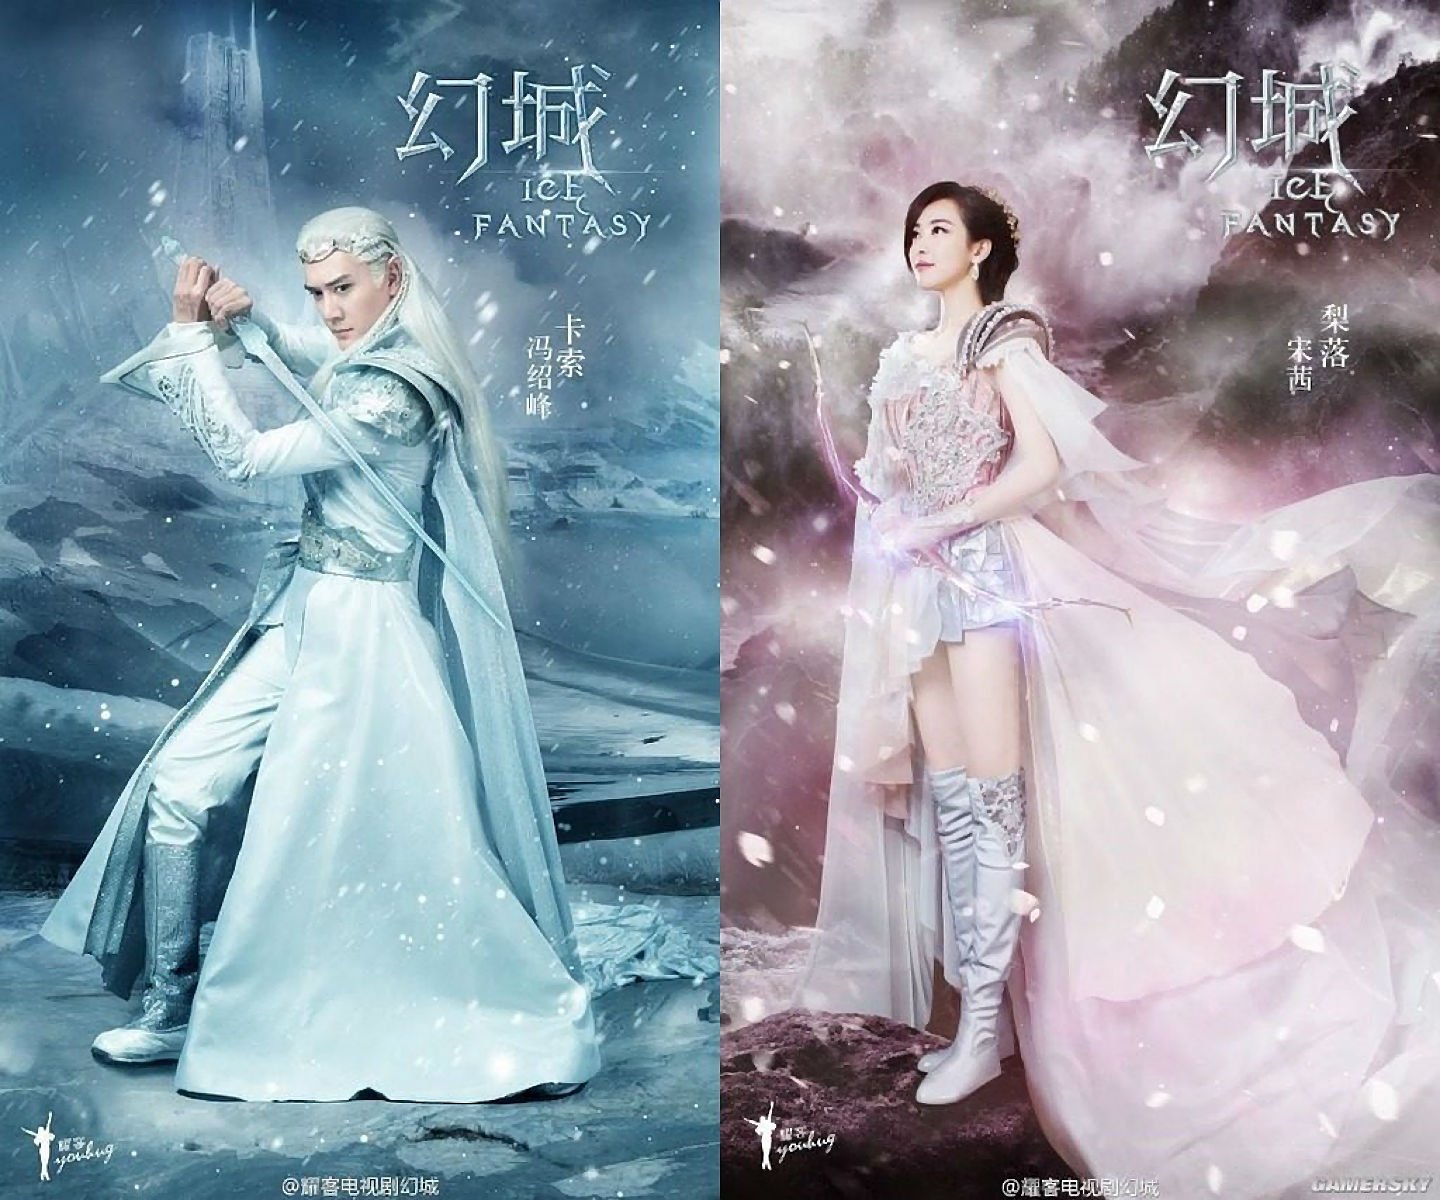 ice, Fantasy, Huancheng, Movie, Asian, Oriental, Action, Fighting